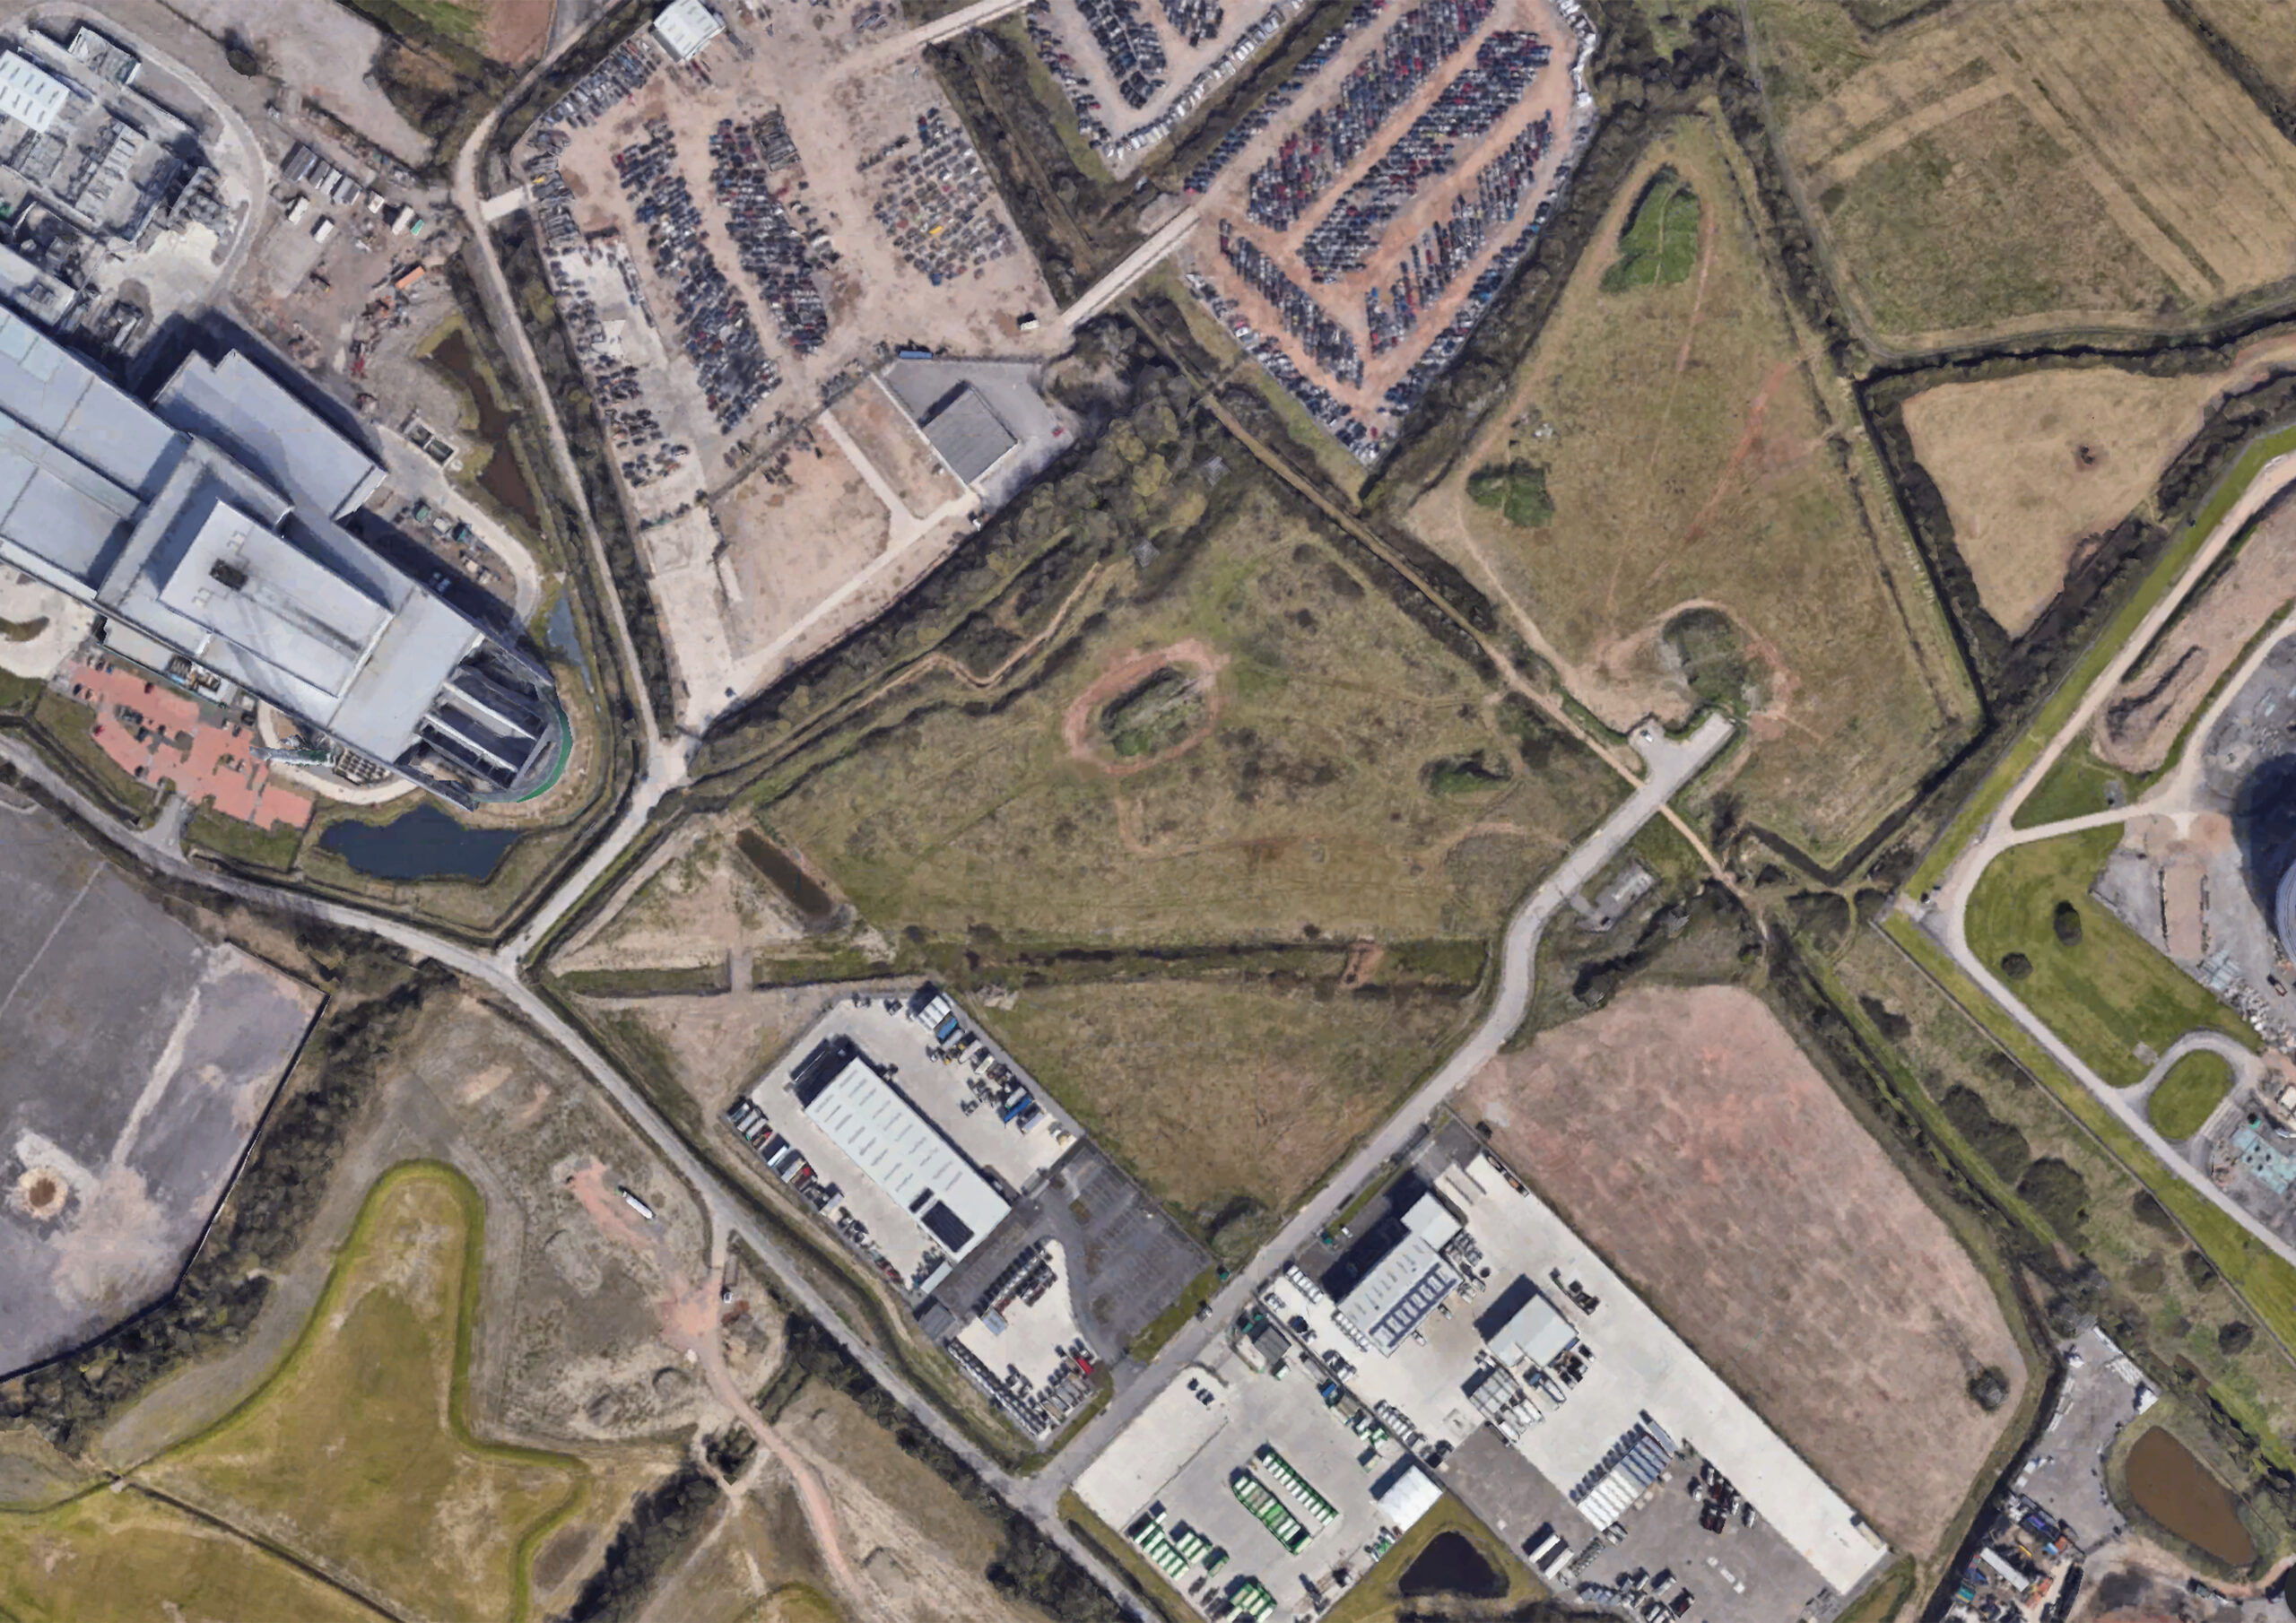 Bird Eye Site Map view of Severngate Business Park in Avonmouth, Bristol